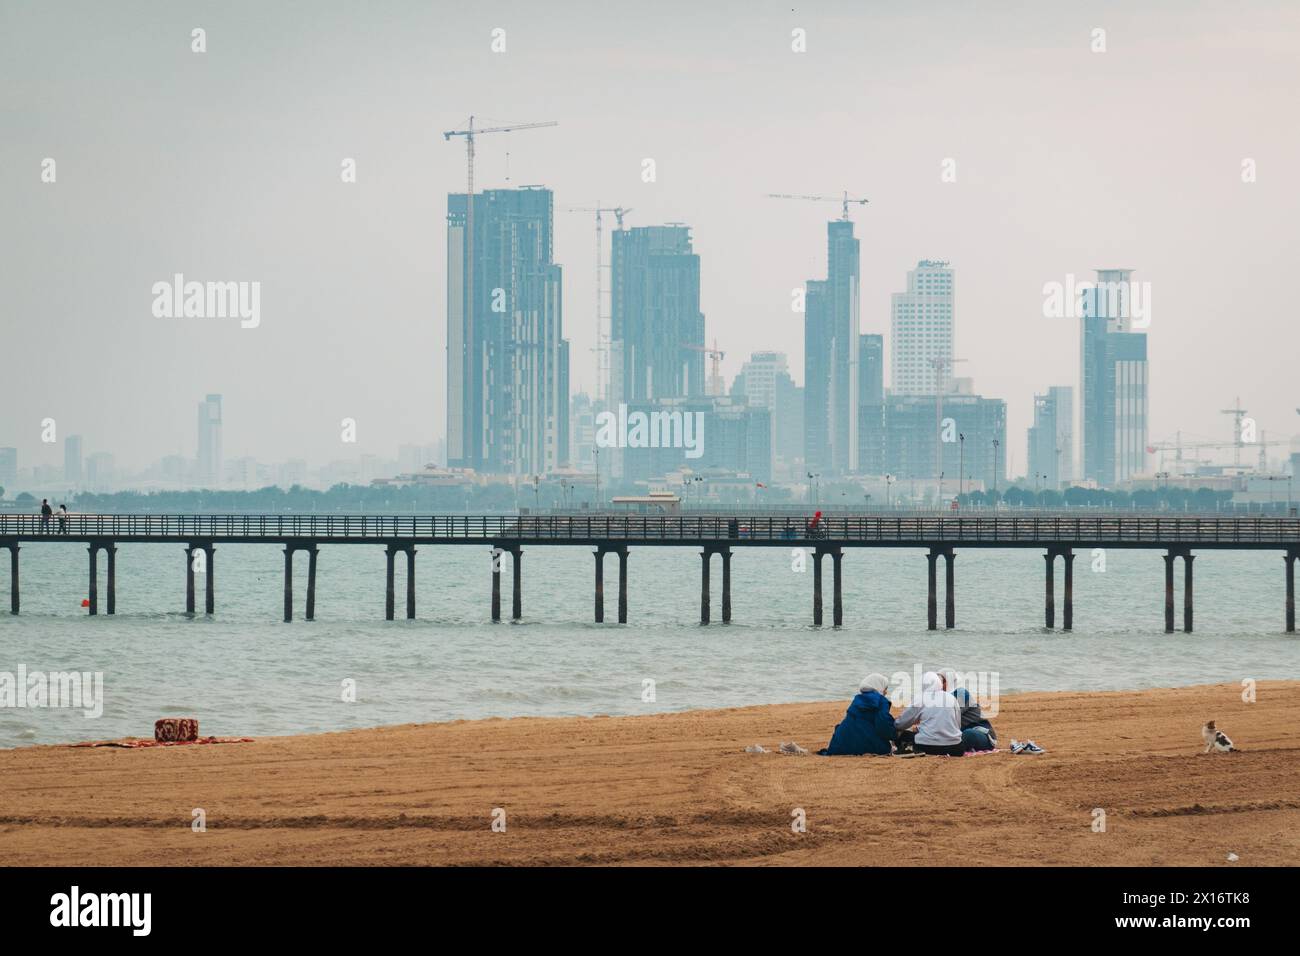 Three women picnic on Towers Beach, Kuwait City, Kuwait. New high rise construction visible in the background Stock Photo